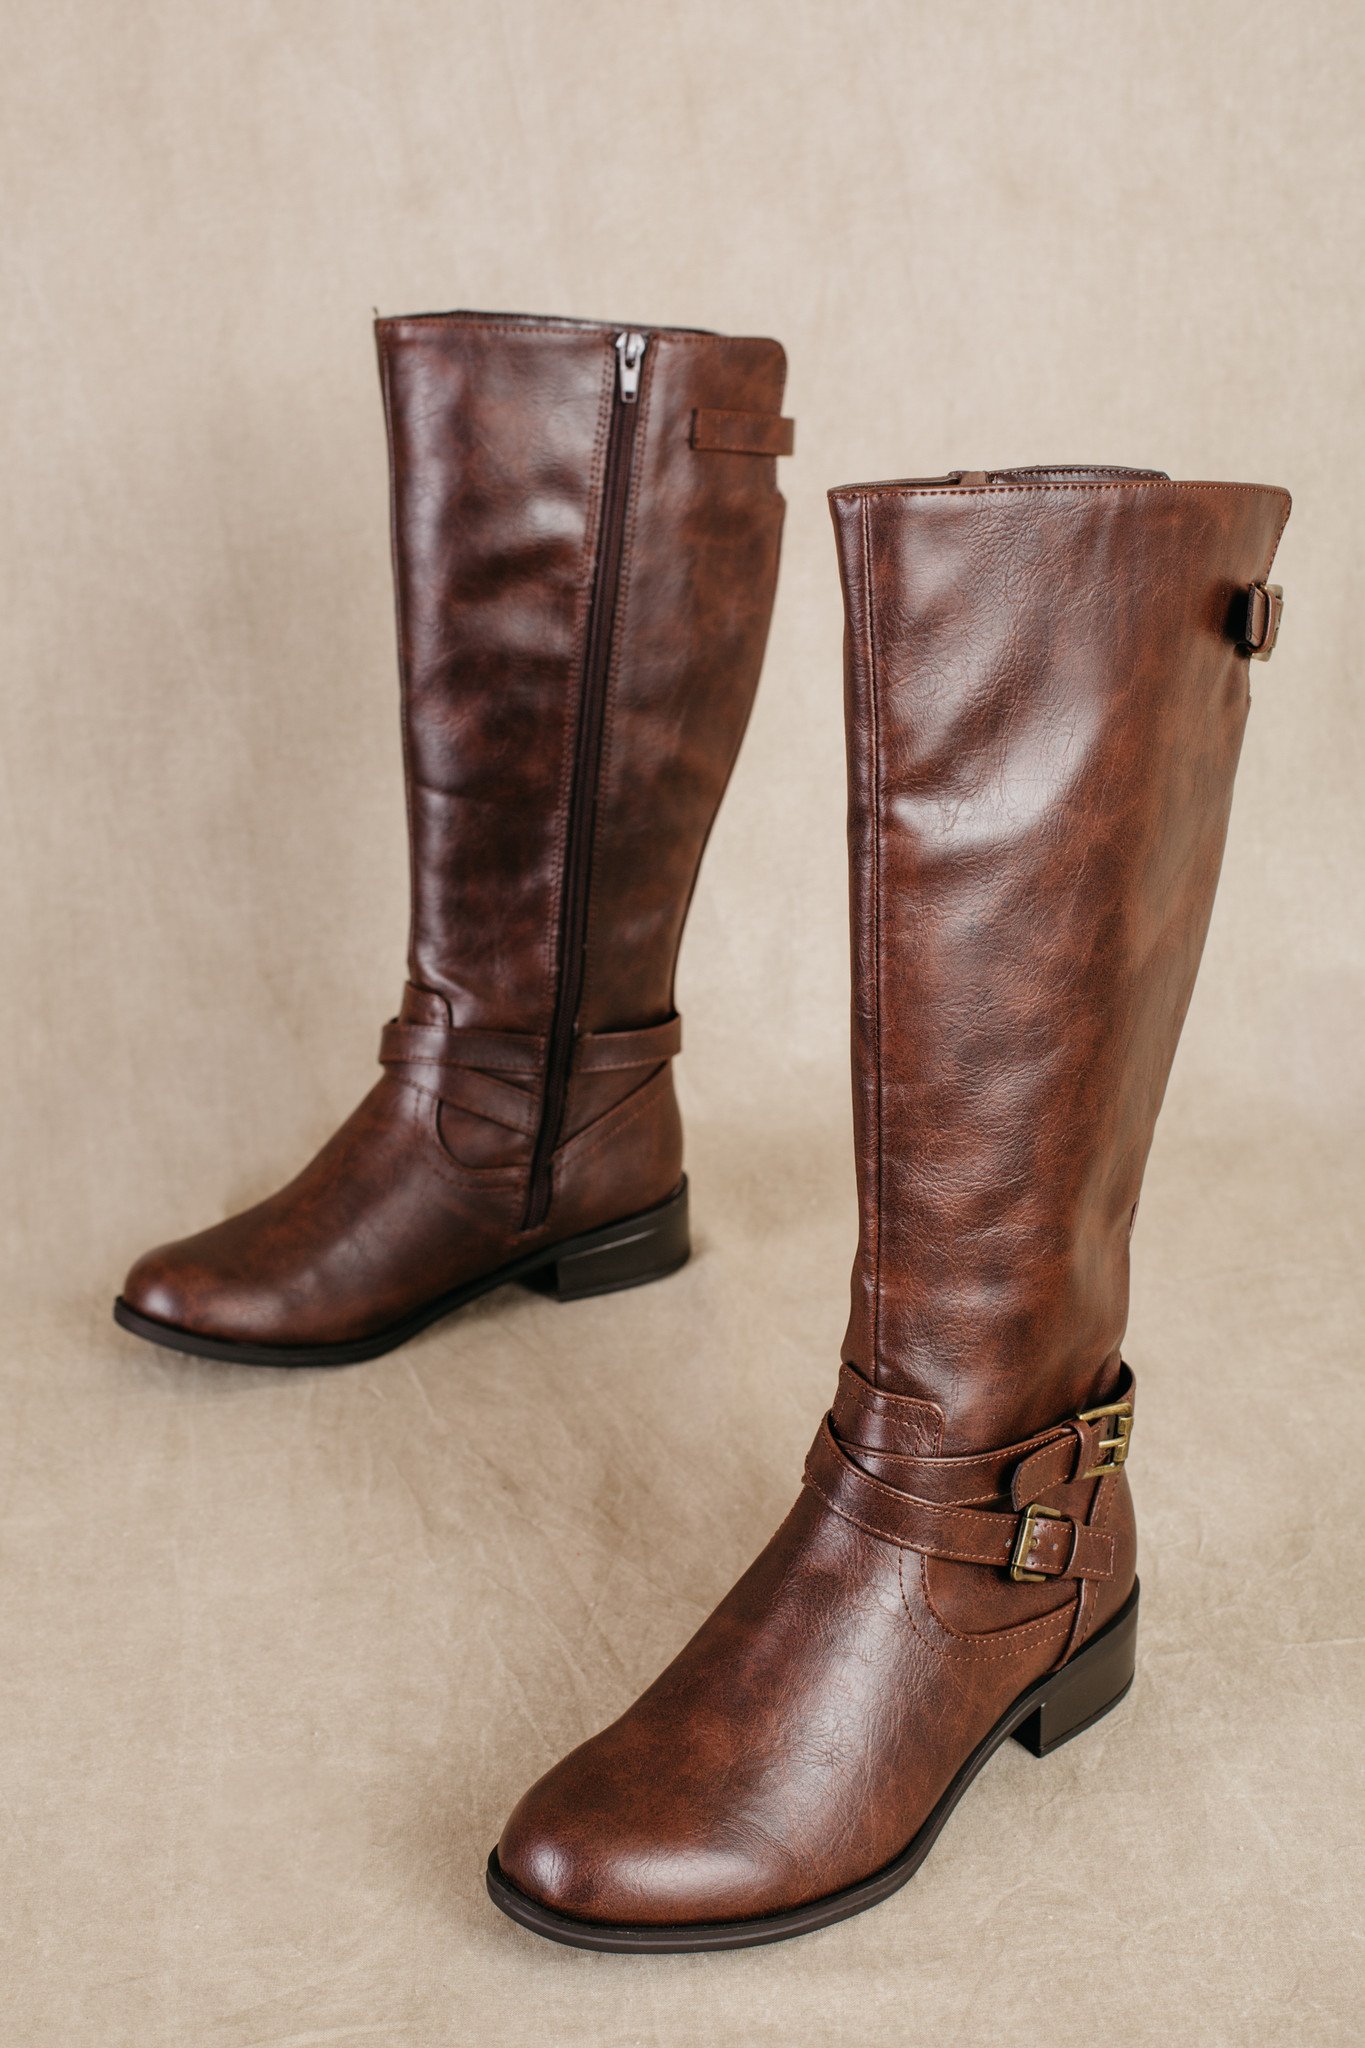 Women's Leather Boots-Mid Calf Boots-Vegan Leather-Women's Boots ...